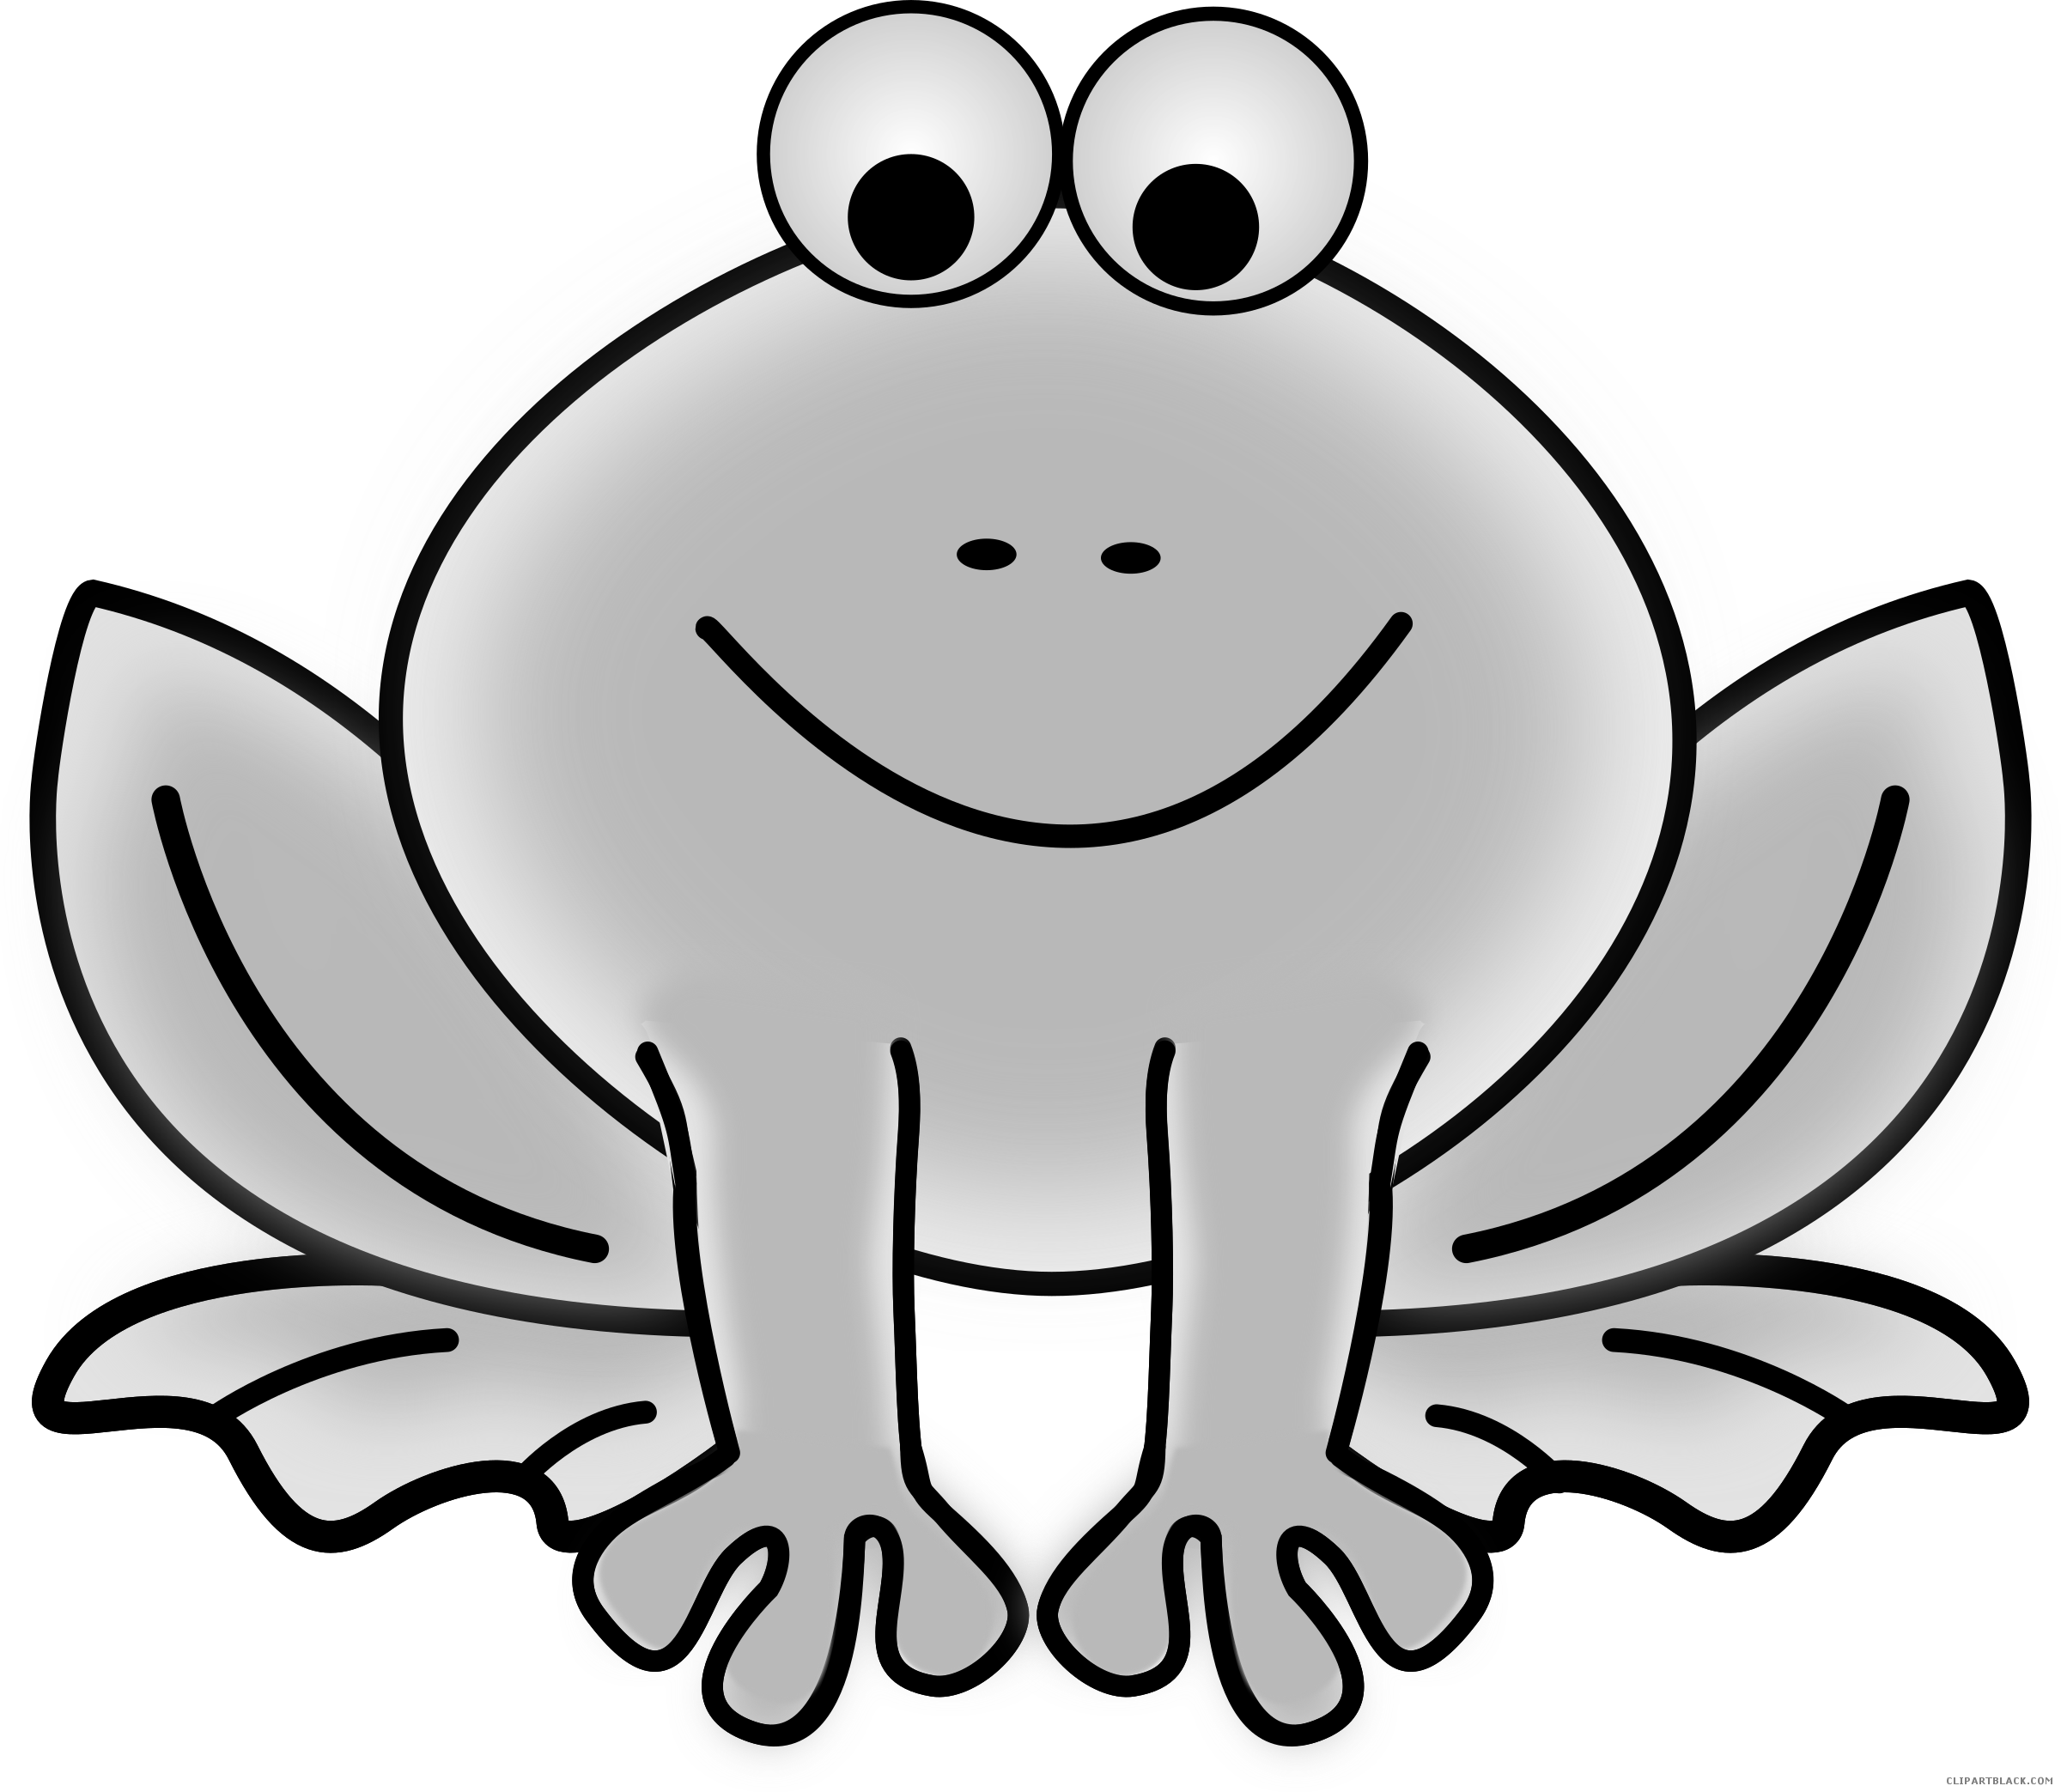 Grayscale Frog Animal Free Black White Clipart Images - Coqui Frog Clip Art (2400x2087)